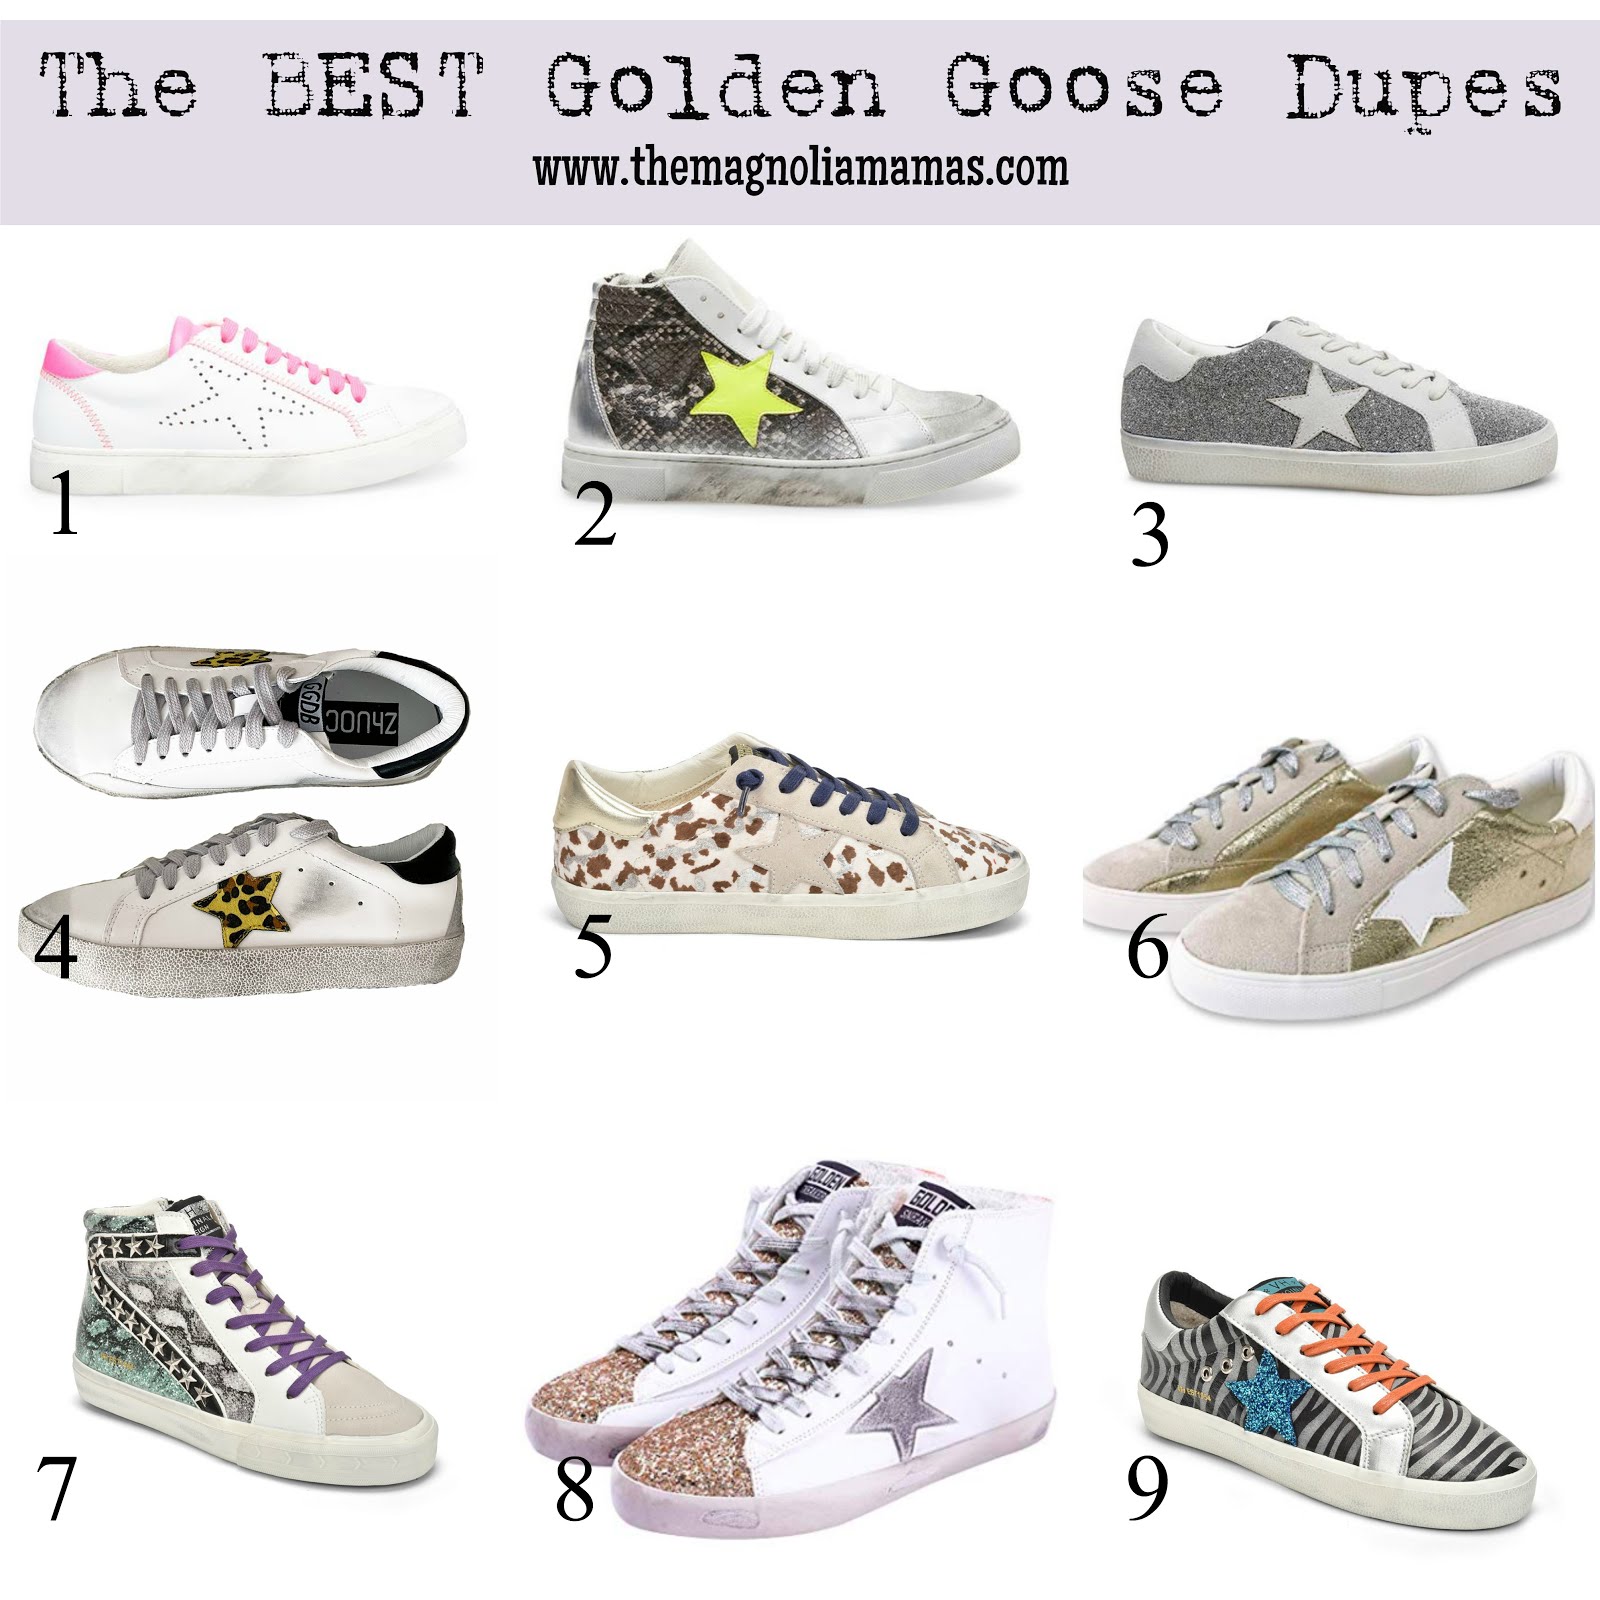  Magnolia Mamas : The BEST Golden Goose Dupes